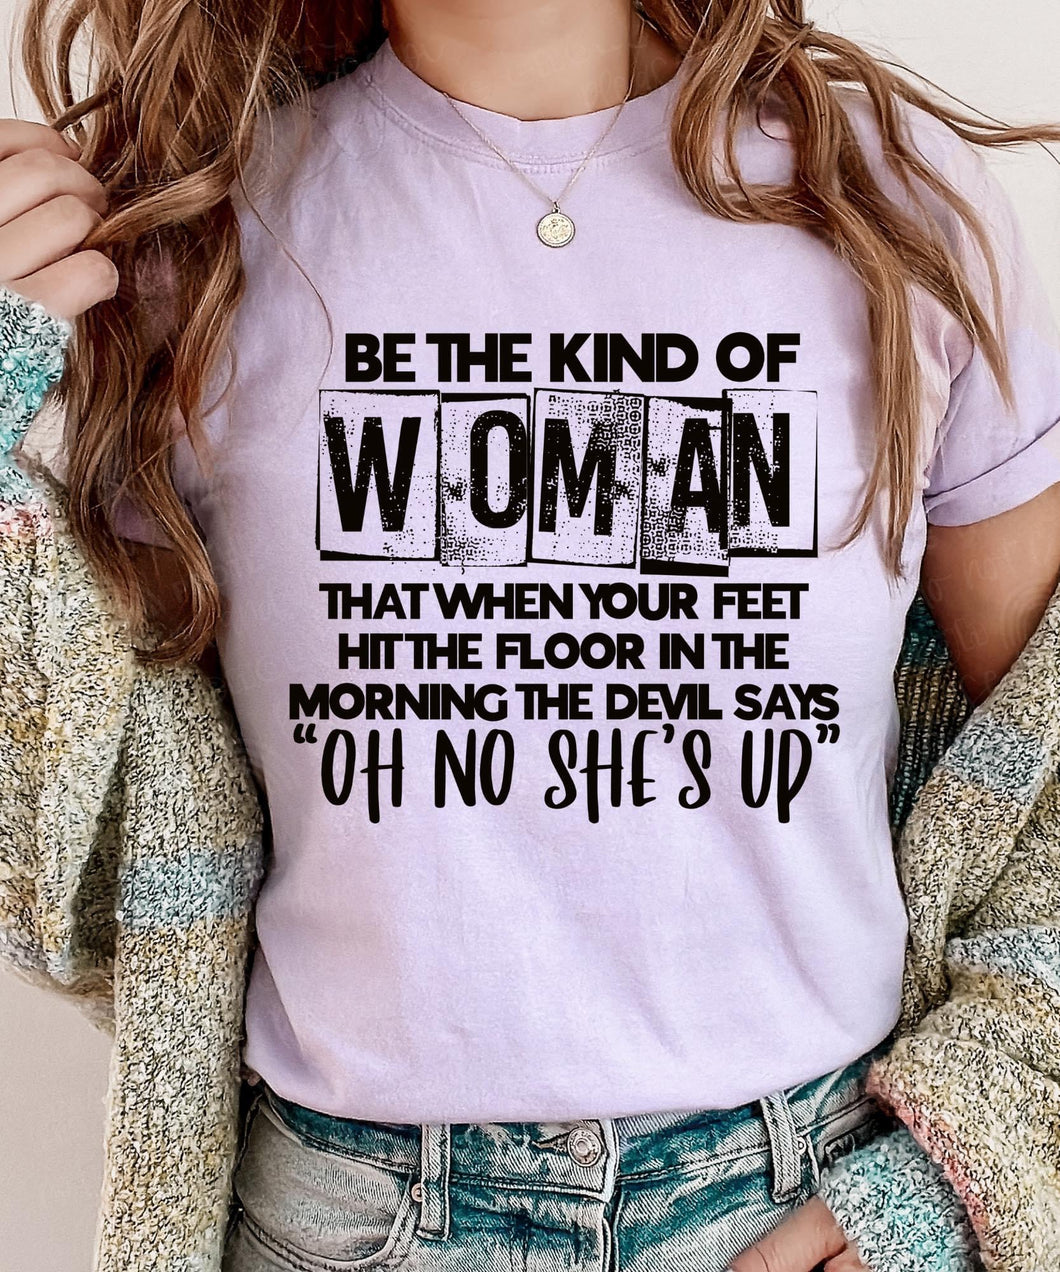 Be the Kind of Woman…